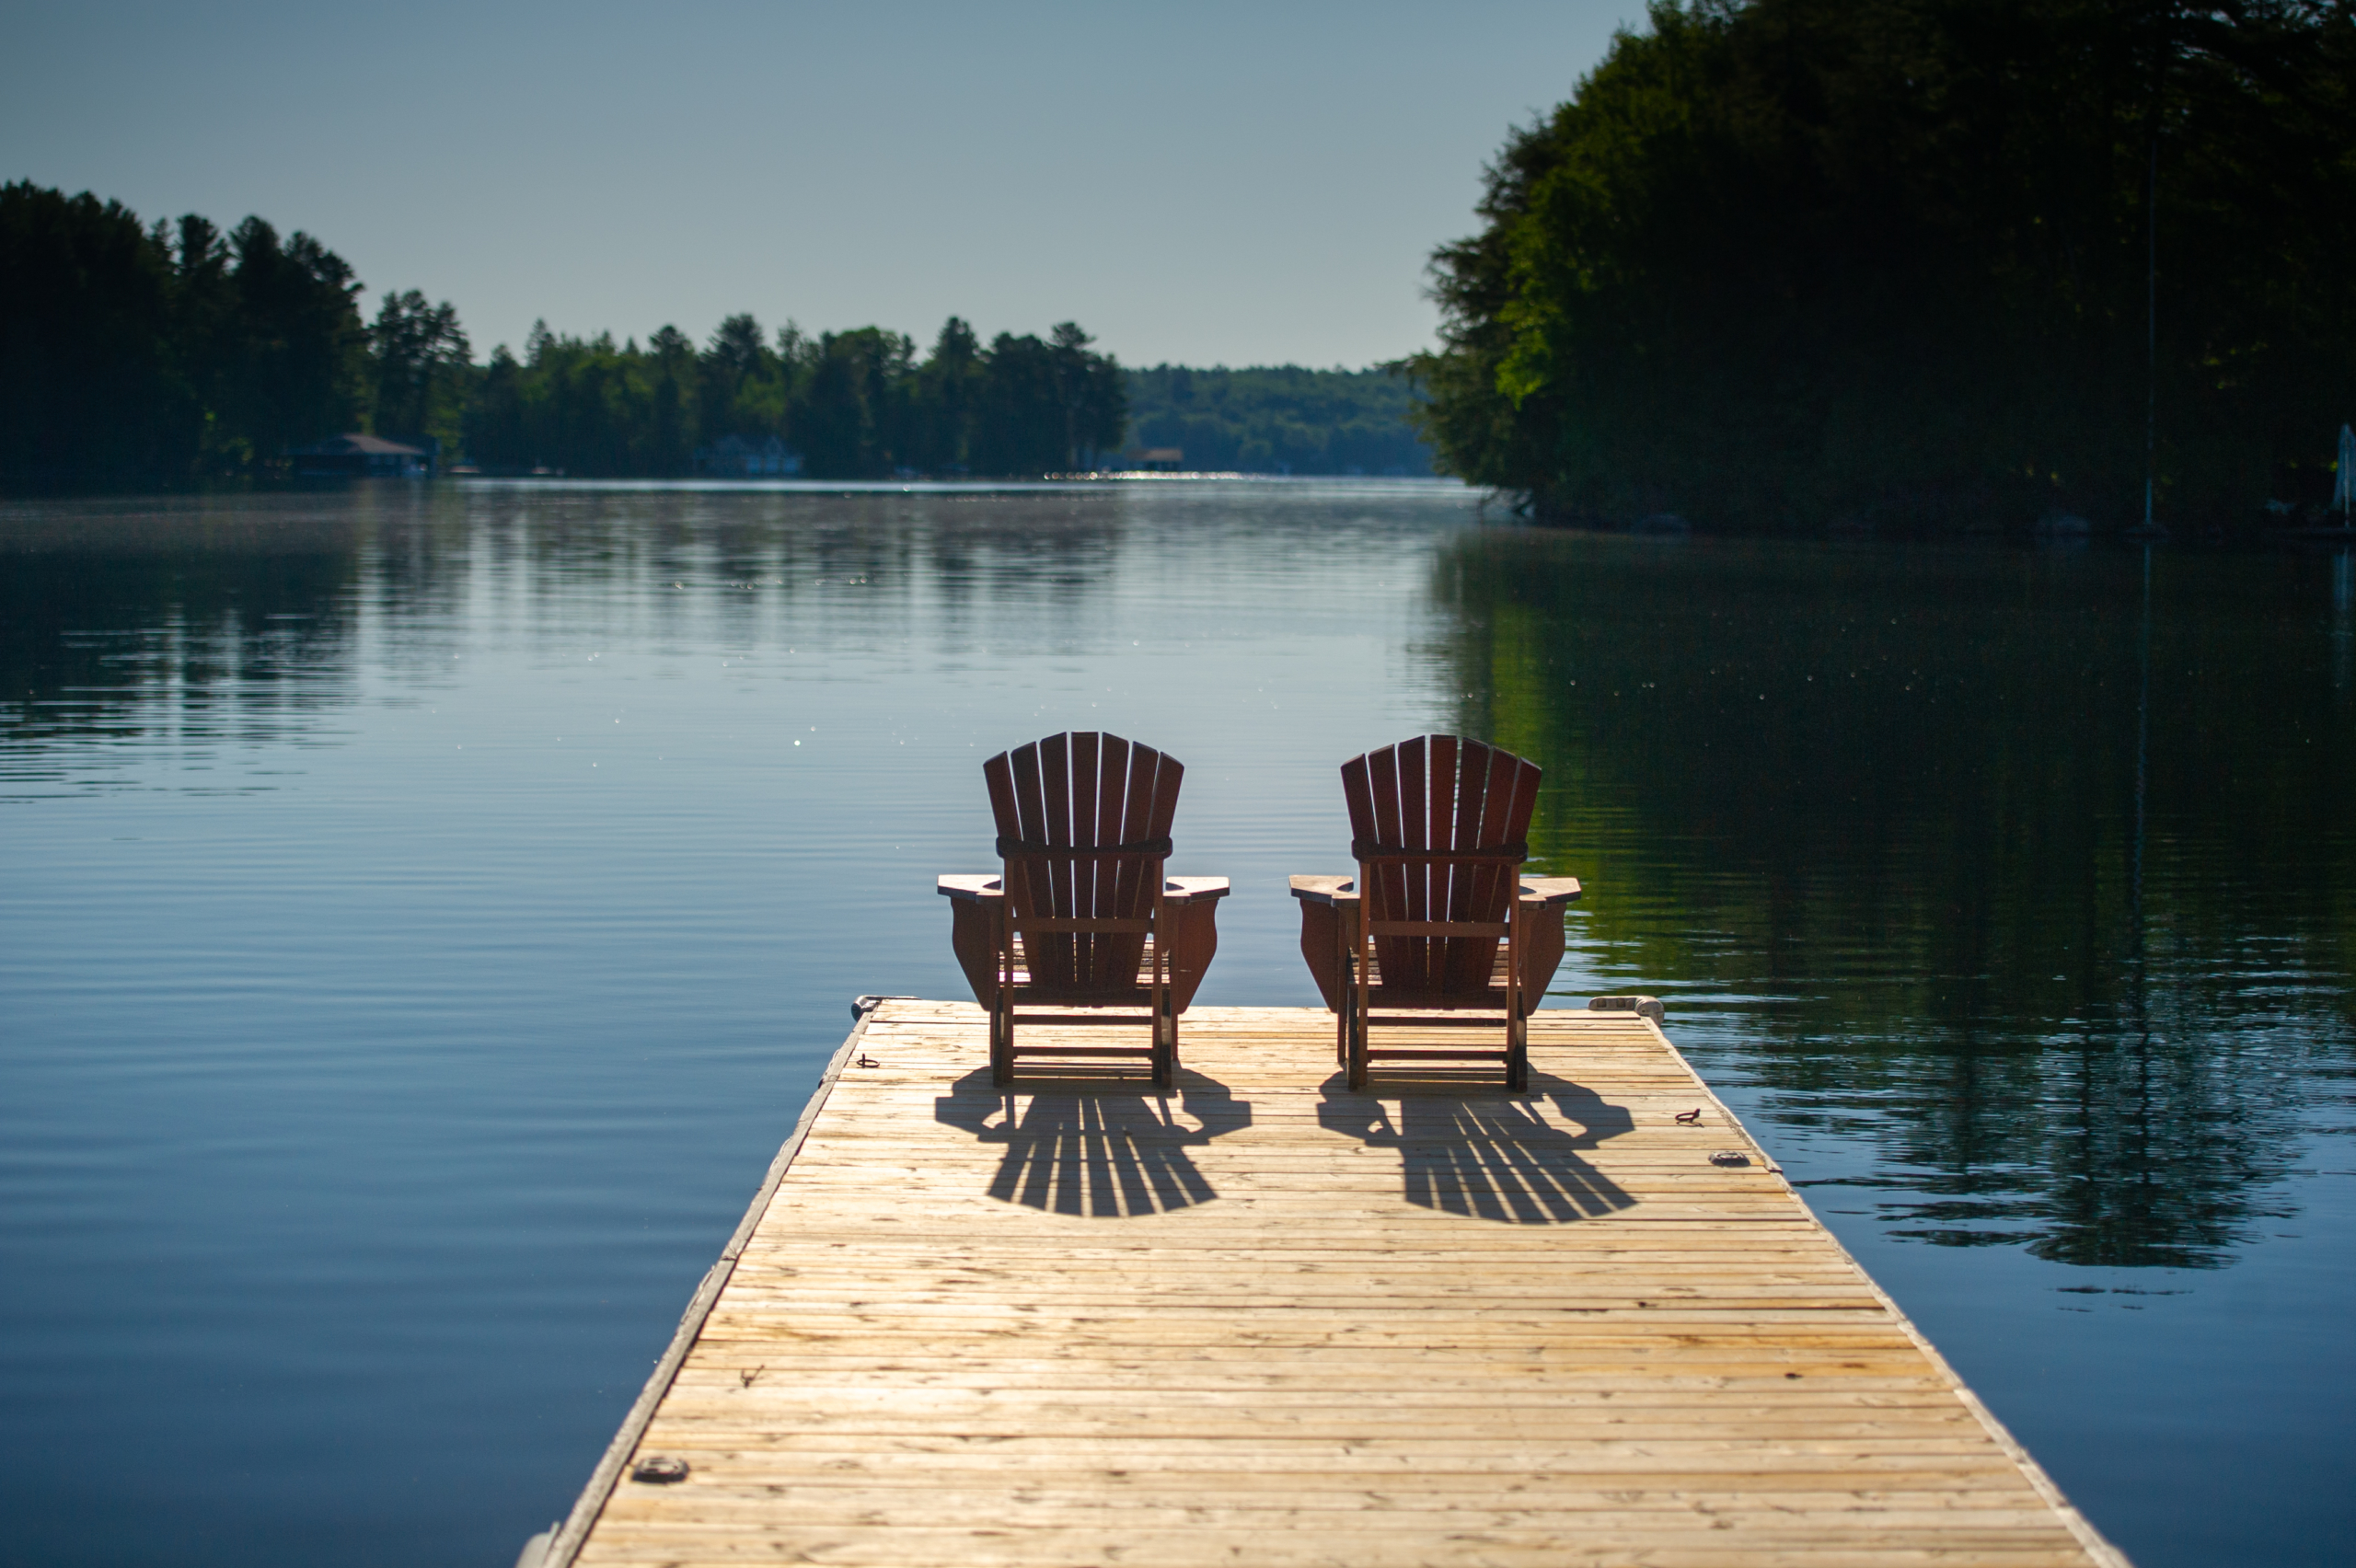 Adirondack chairs sitting on a wooden pier